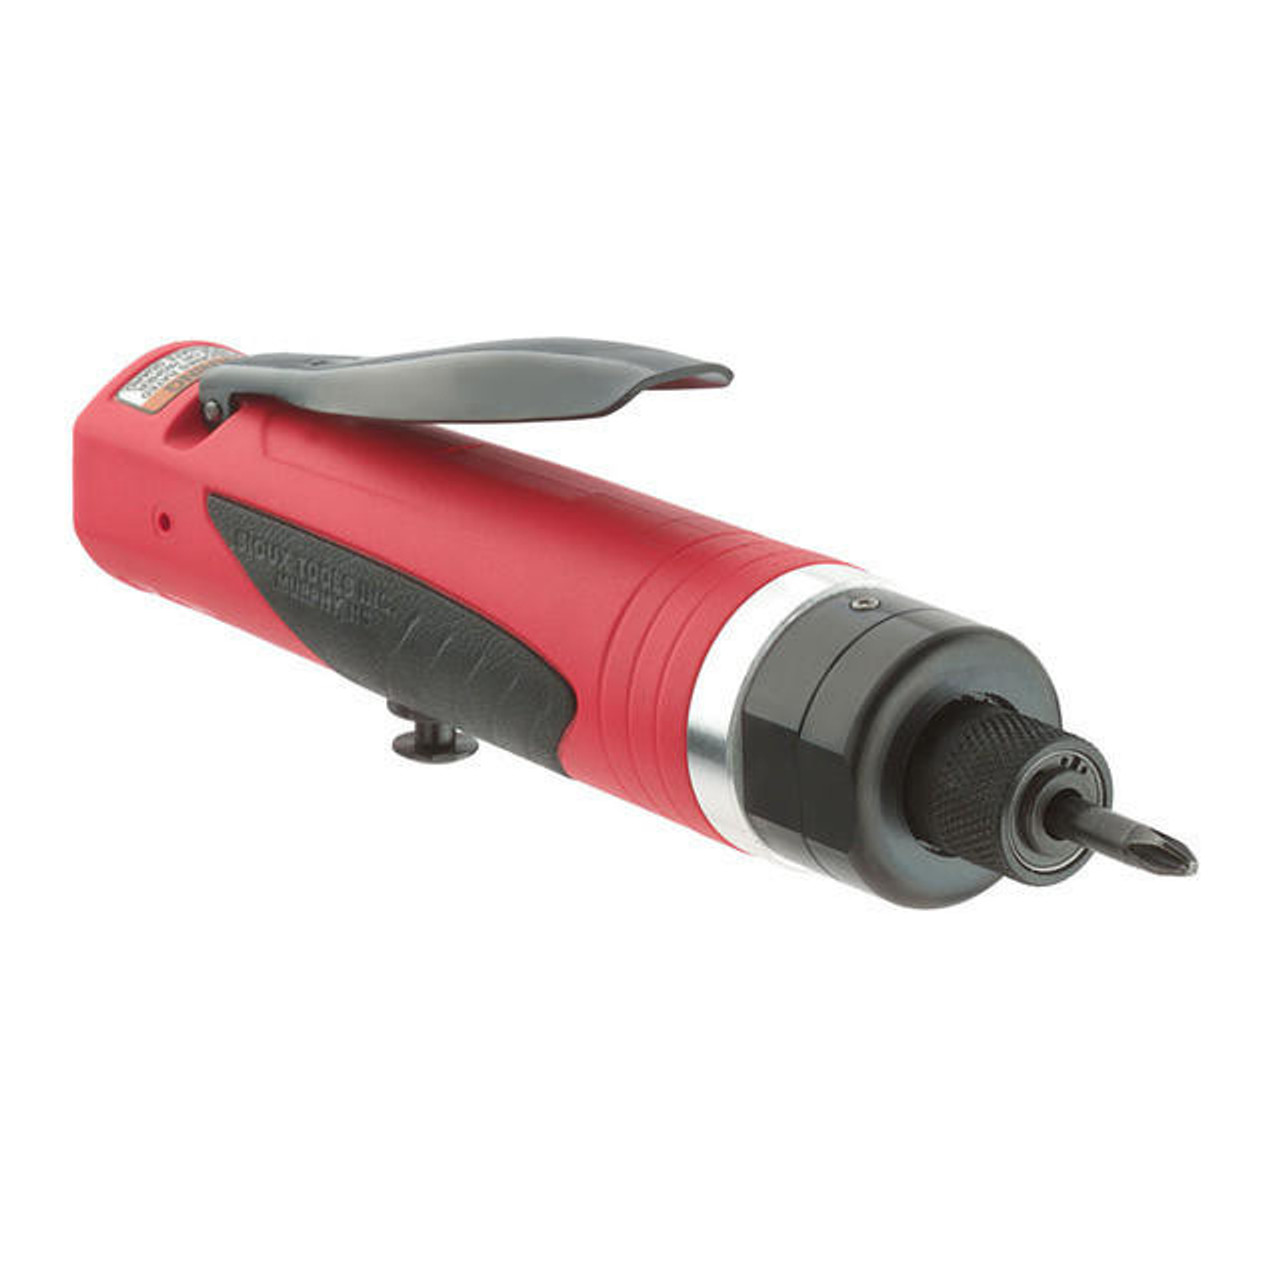  Sioux Tools SSD10S5S Stall Clutch Inline Screwdriver | 500 RPM | 325 in.-lb. Max Torque 